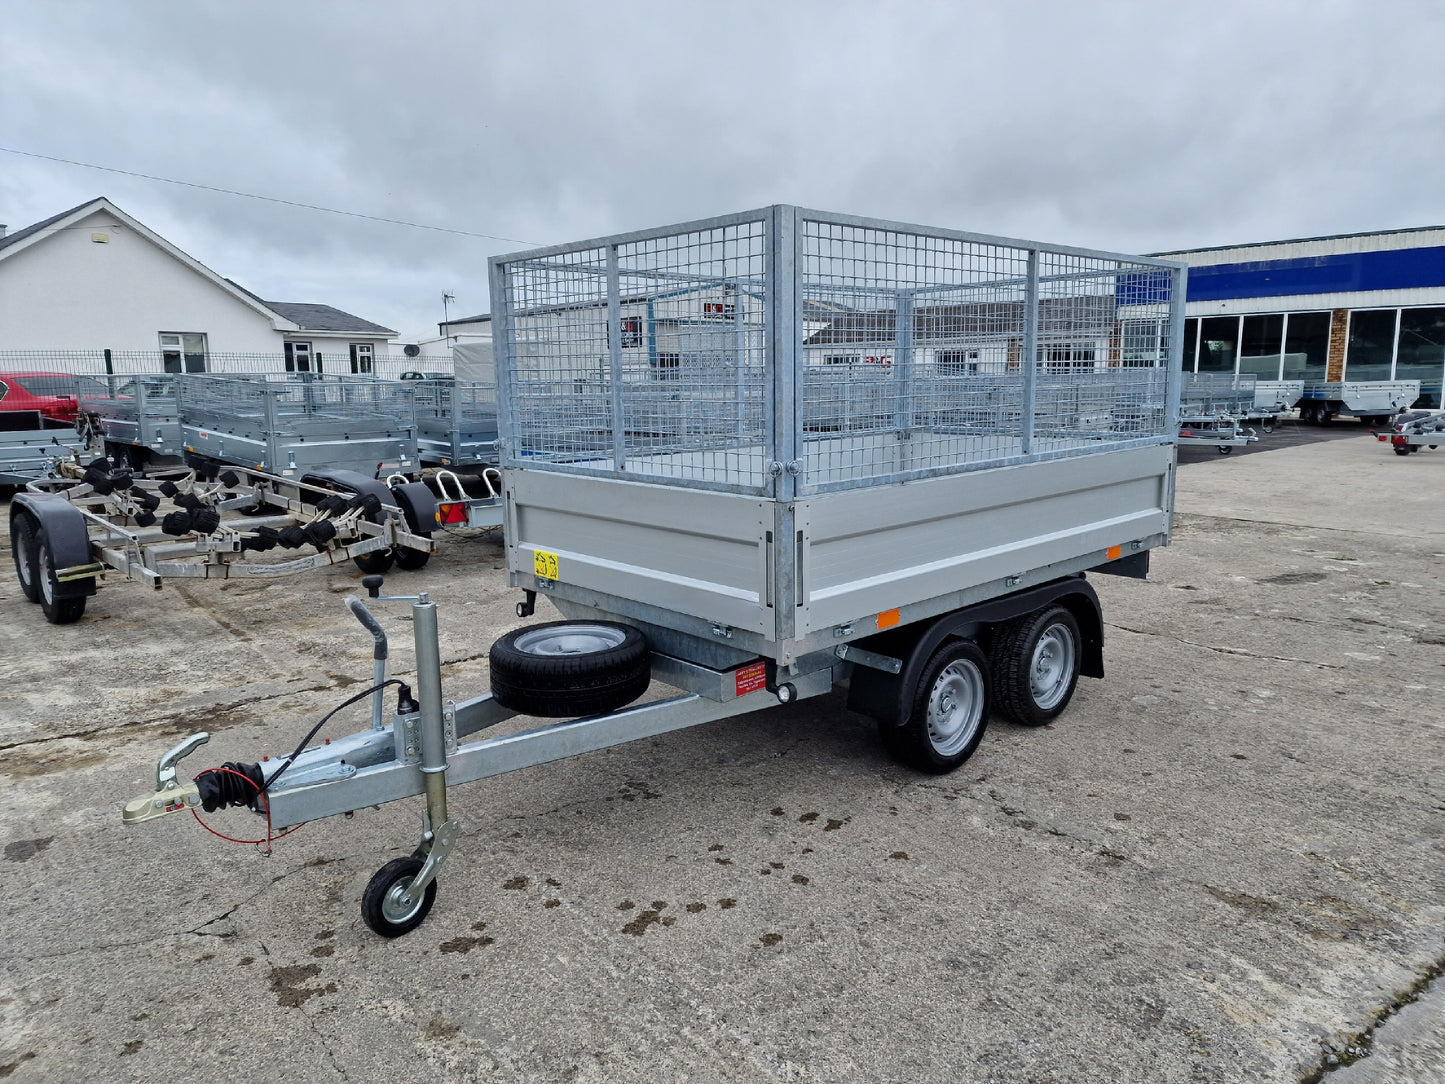 NEW 9 x 5 Tipper Trailer with Mesh